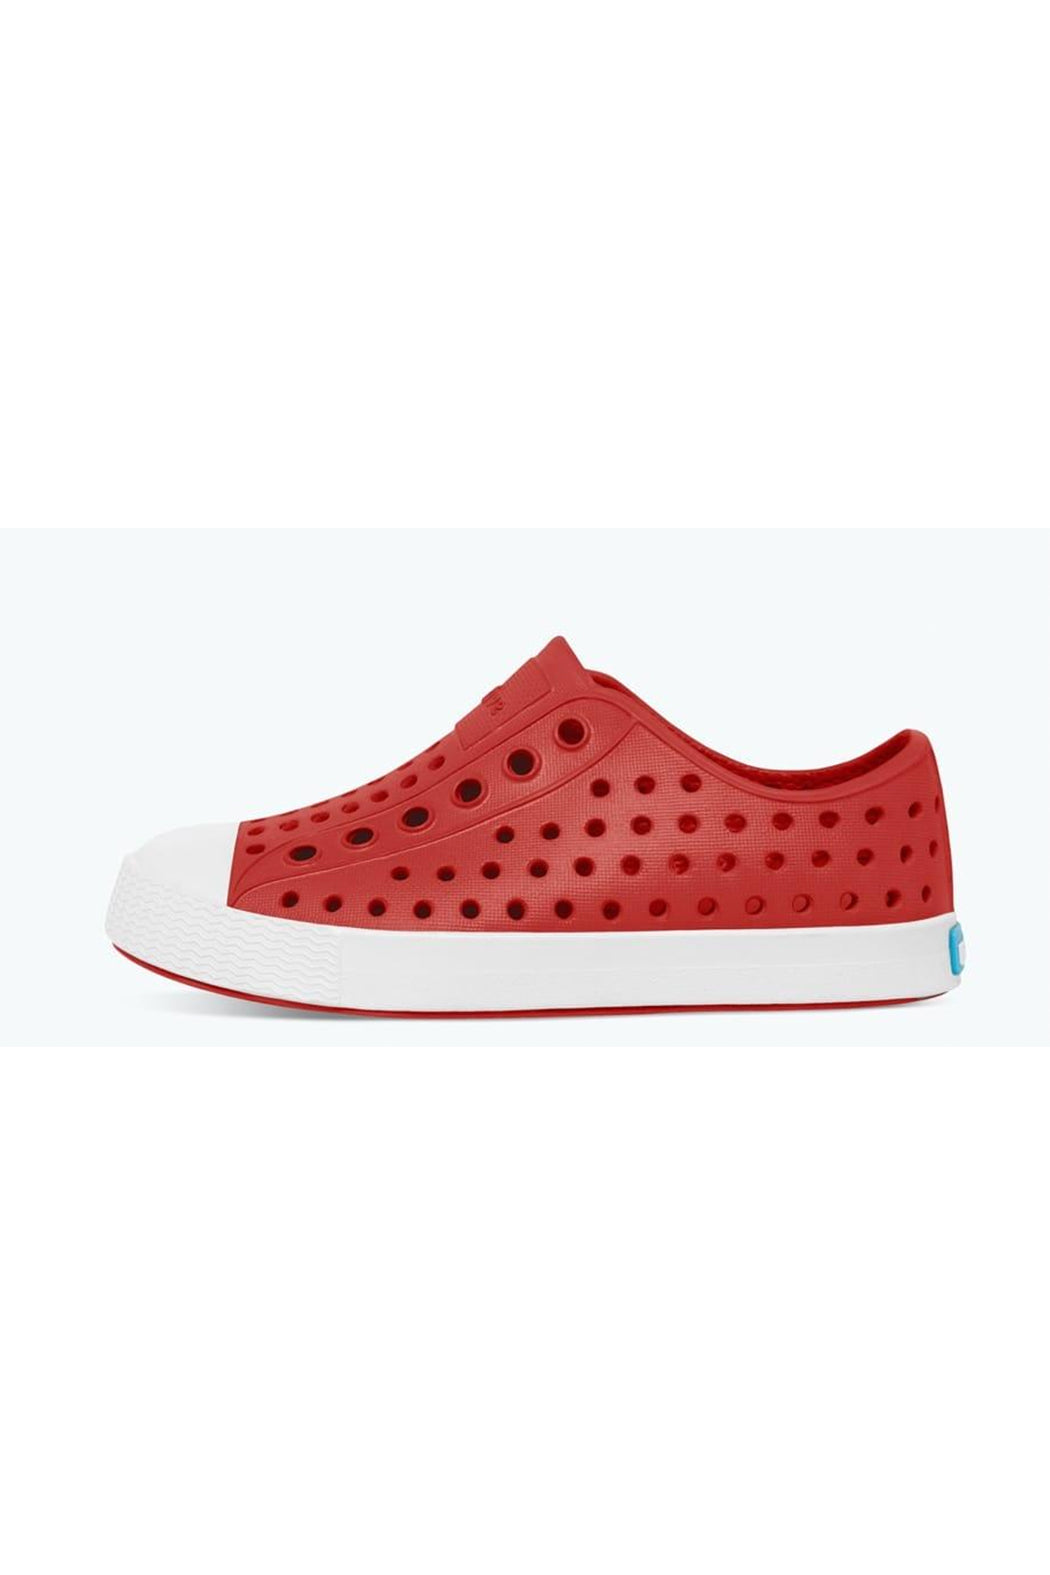 Native Jefferson Big Kid Shoes - Torch Red/Shell White